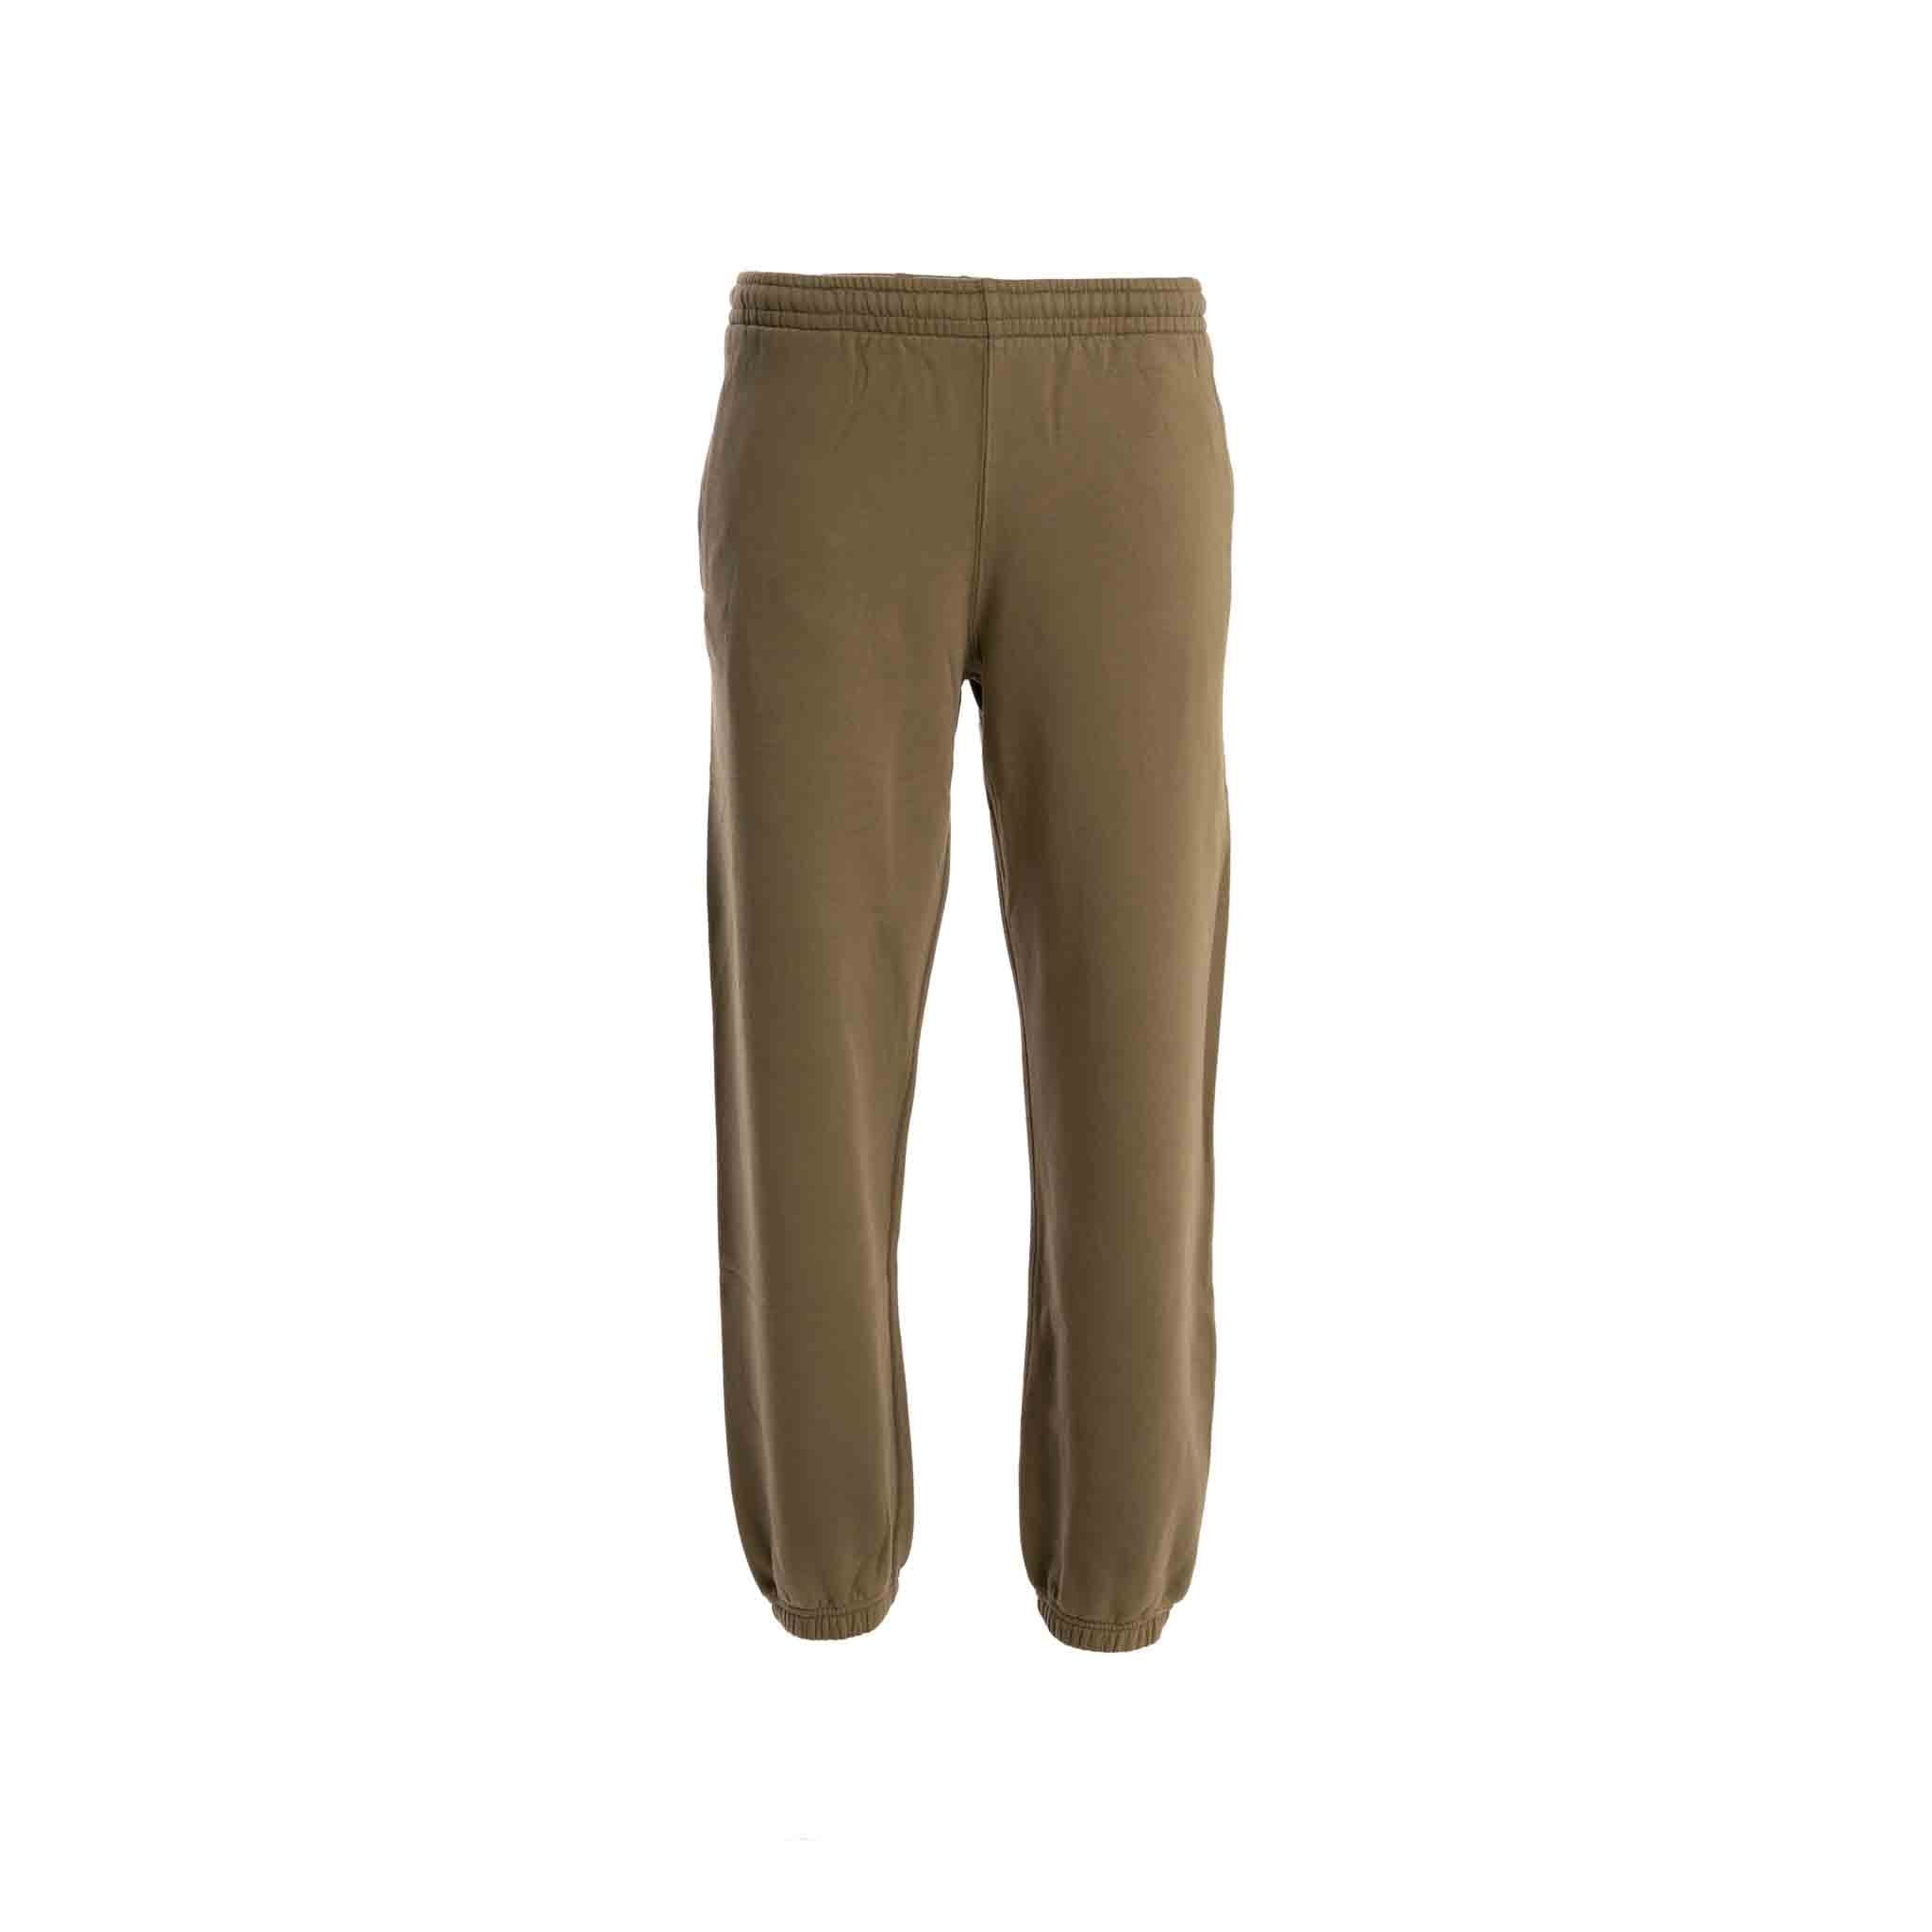 The OFF-WHITE Rubber Arrow sweatpants are a stylish and comfortable addition to any casual wardrobe. Made from soft and durable cotton, these sweatpants feature a bold green color and rubber arrow graphics on the back of the legs. The elasticated waistband and cuffs ensure a secure and comfortable fit, while the two hand pockets provide convenient storage.